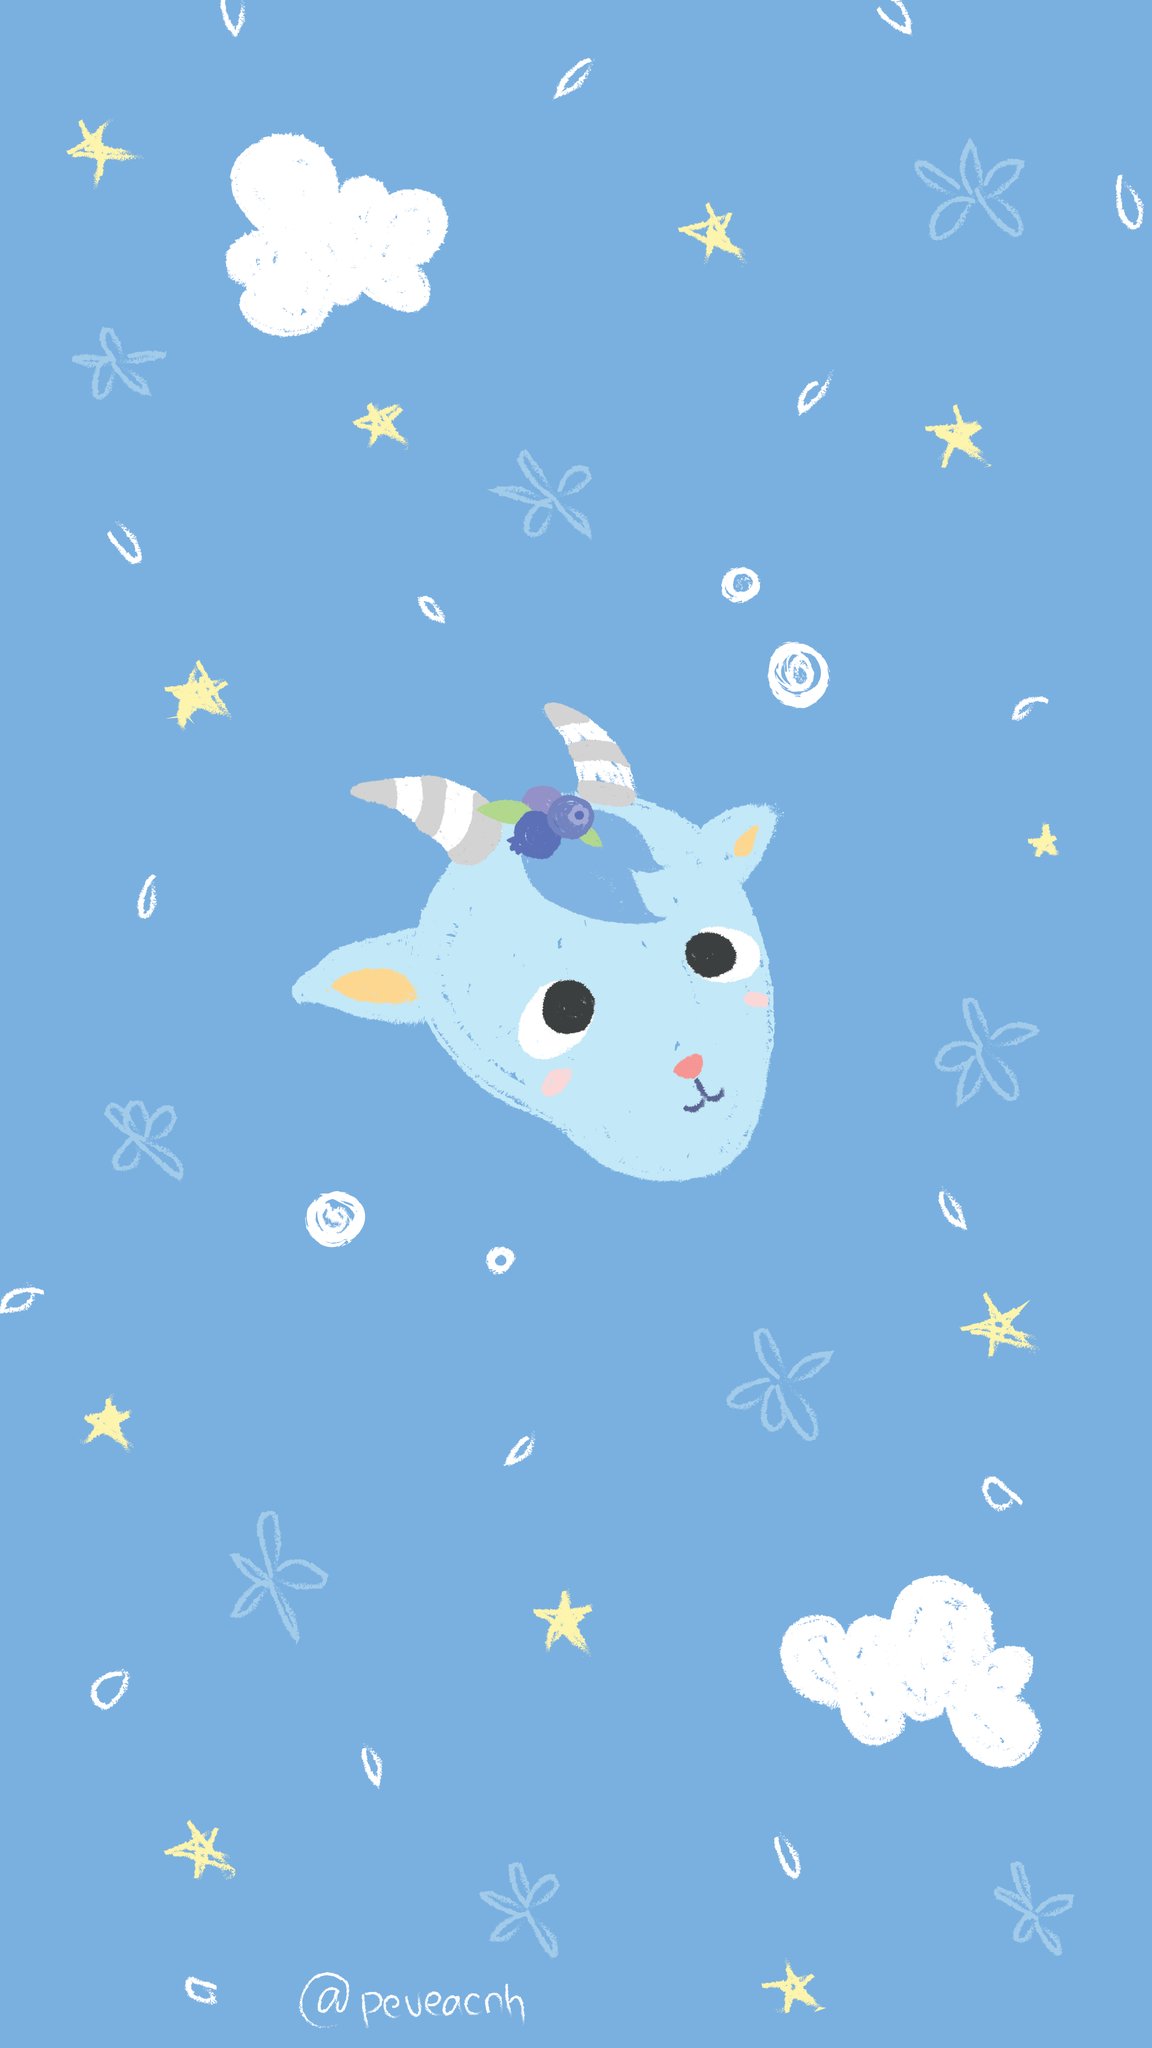 A blue and white animal with stars in the background - Animal Crossing